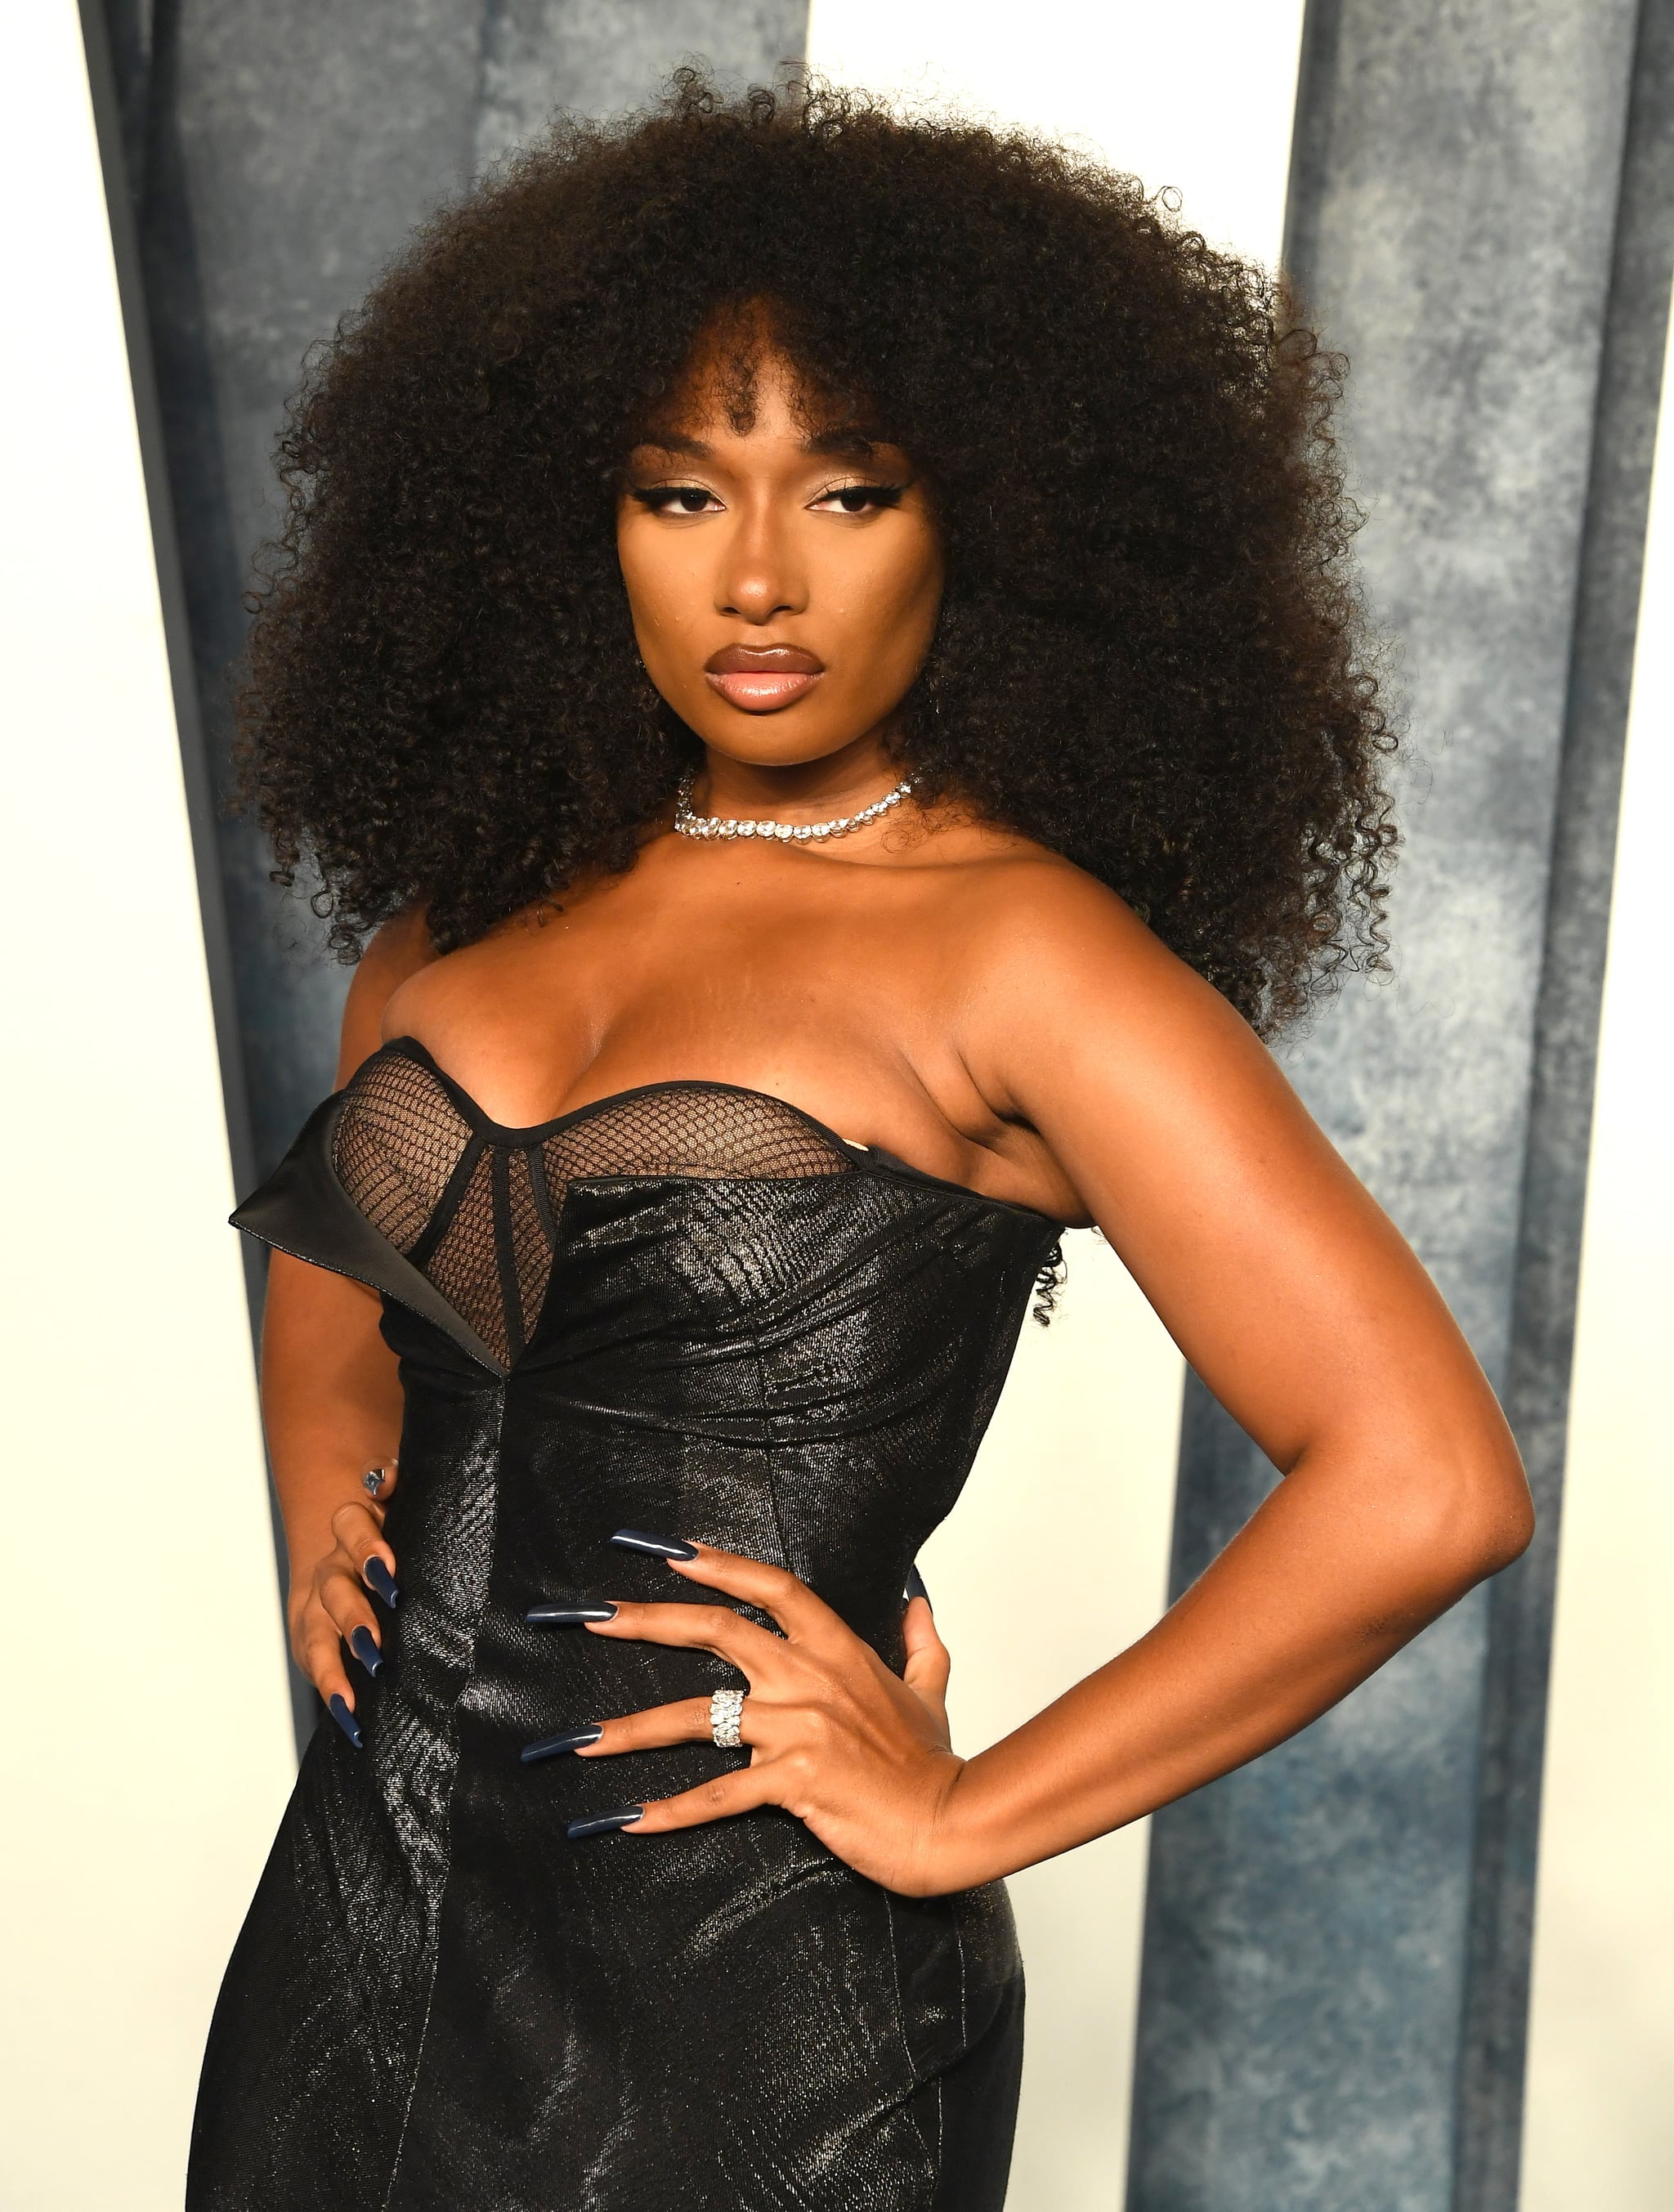 BEVERLY HILLS, CALIFORNIA - MARCH 12: Megan Thee Stallion arrives at the Vanity Fair Oscar Party Hosted By Radhika Jones at Wallis Annenberg Centre for the Performing Arts on March 12, 2023 in Beverly Hills, California. (Photo by Steve Granitz/FilmMagic)